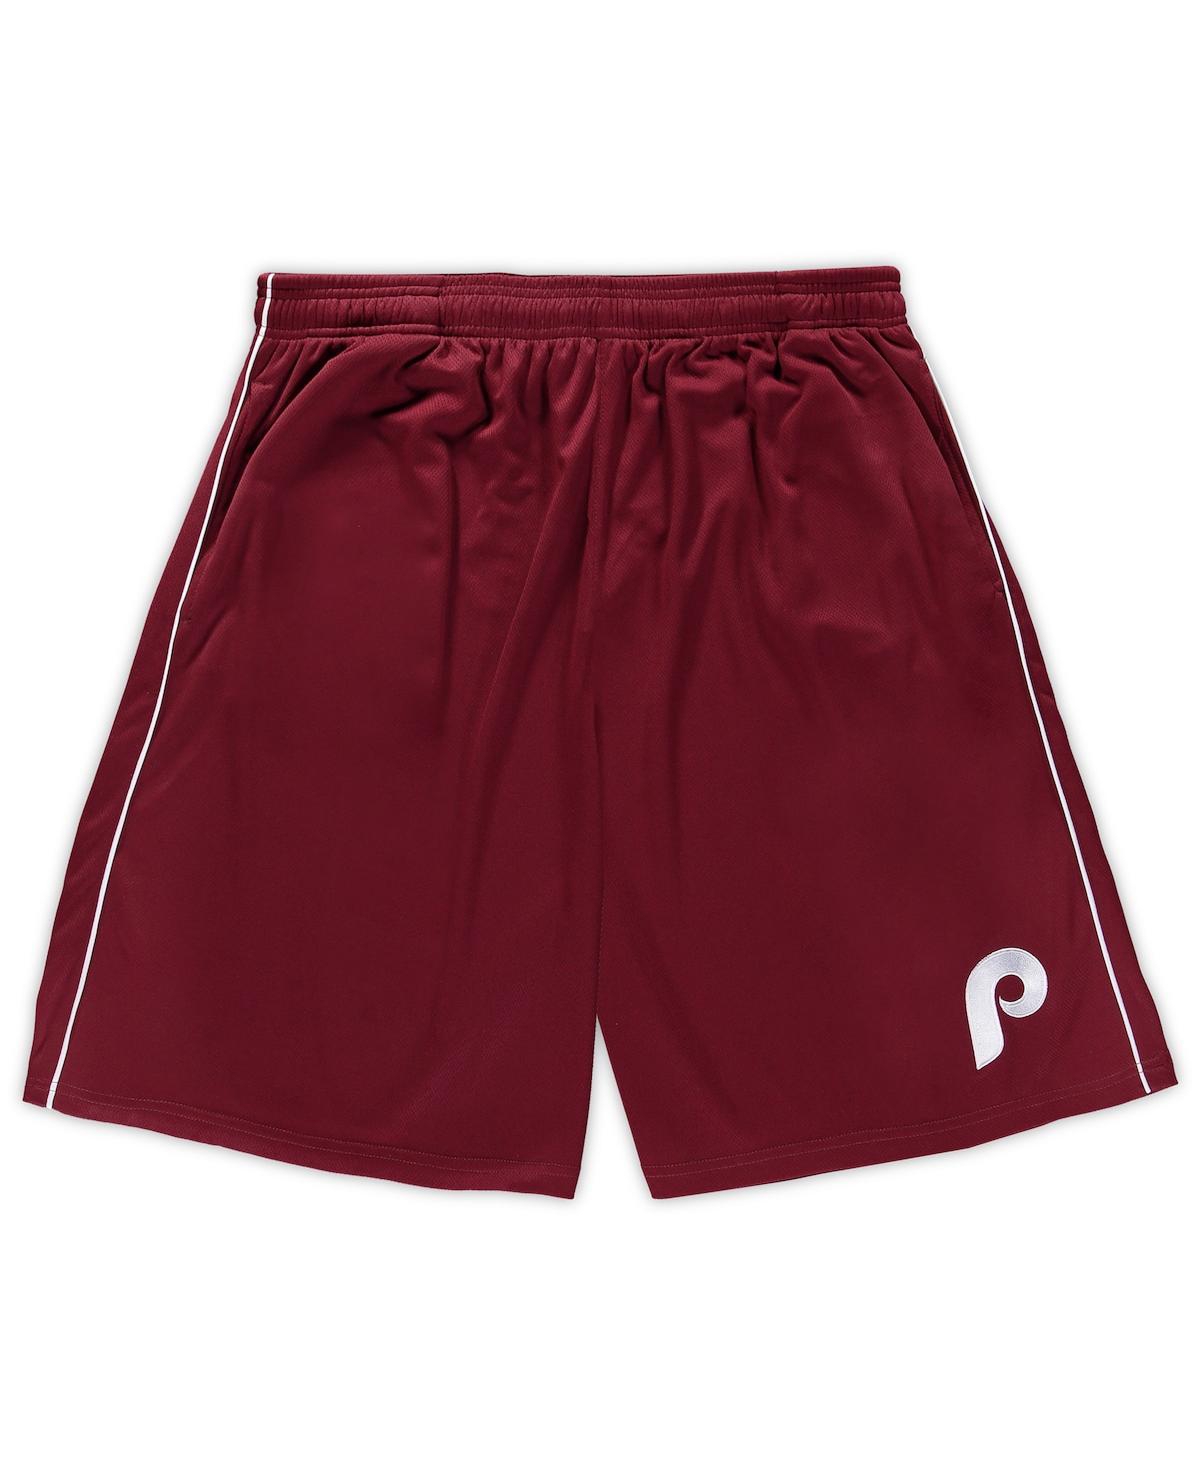 PROFILE MEN'S BURGUNDY PHILADELPHIA PHILLIES BIG AND TALL COOPERSTOWN COLLECTION MESH SHORTS